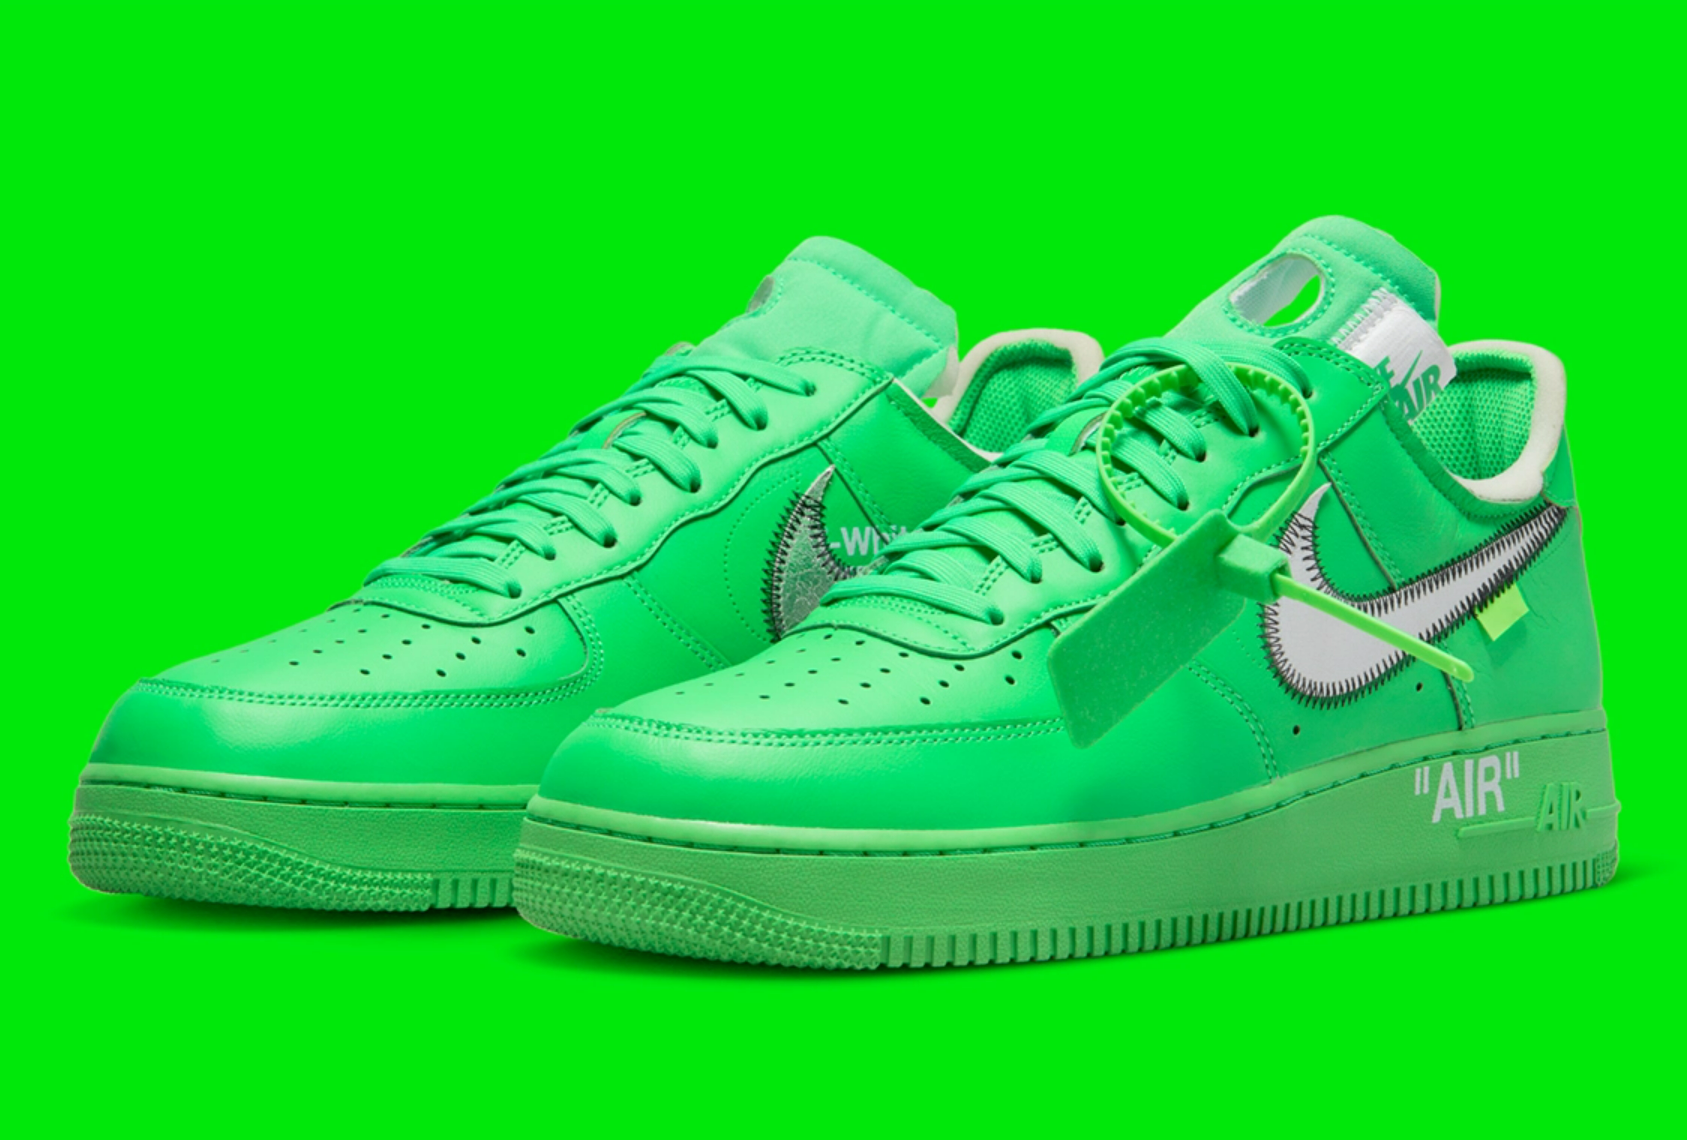 SPOTTED: Central Cee Drops Off Some Snaps ft. Tiffany x Nike AF1s